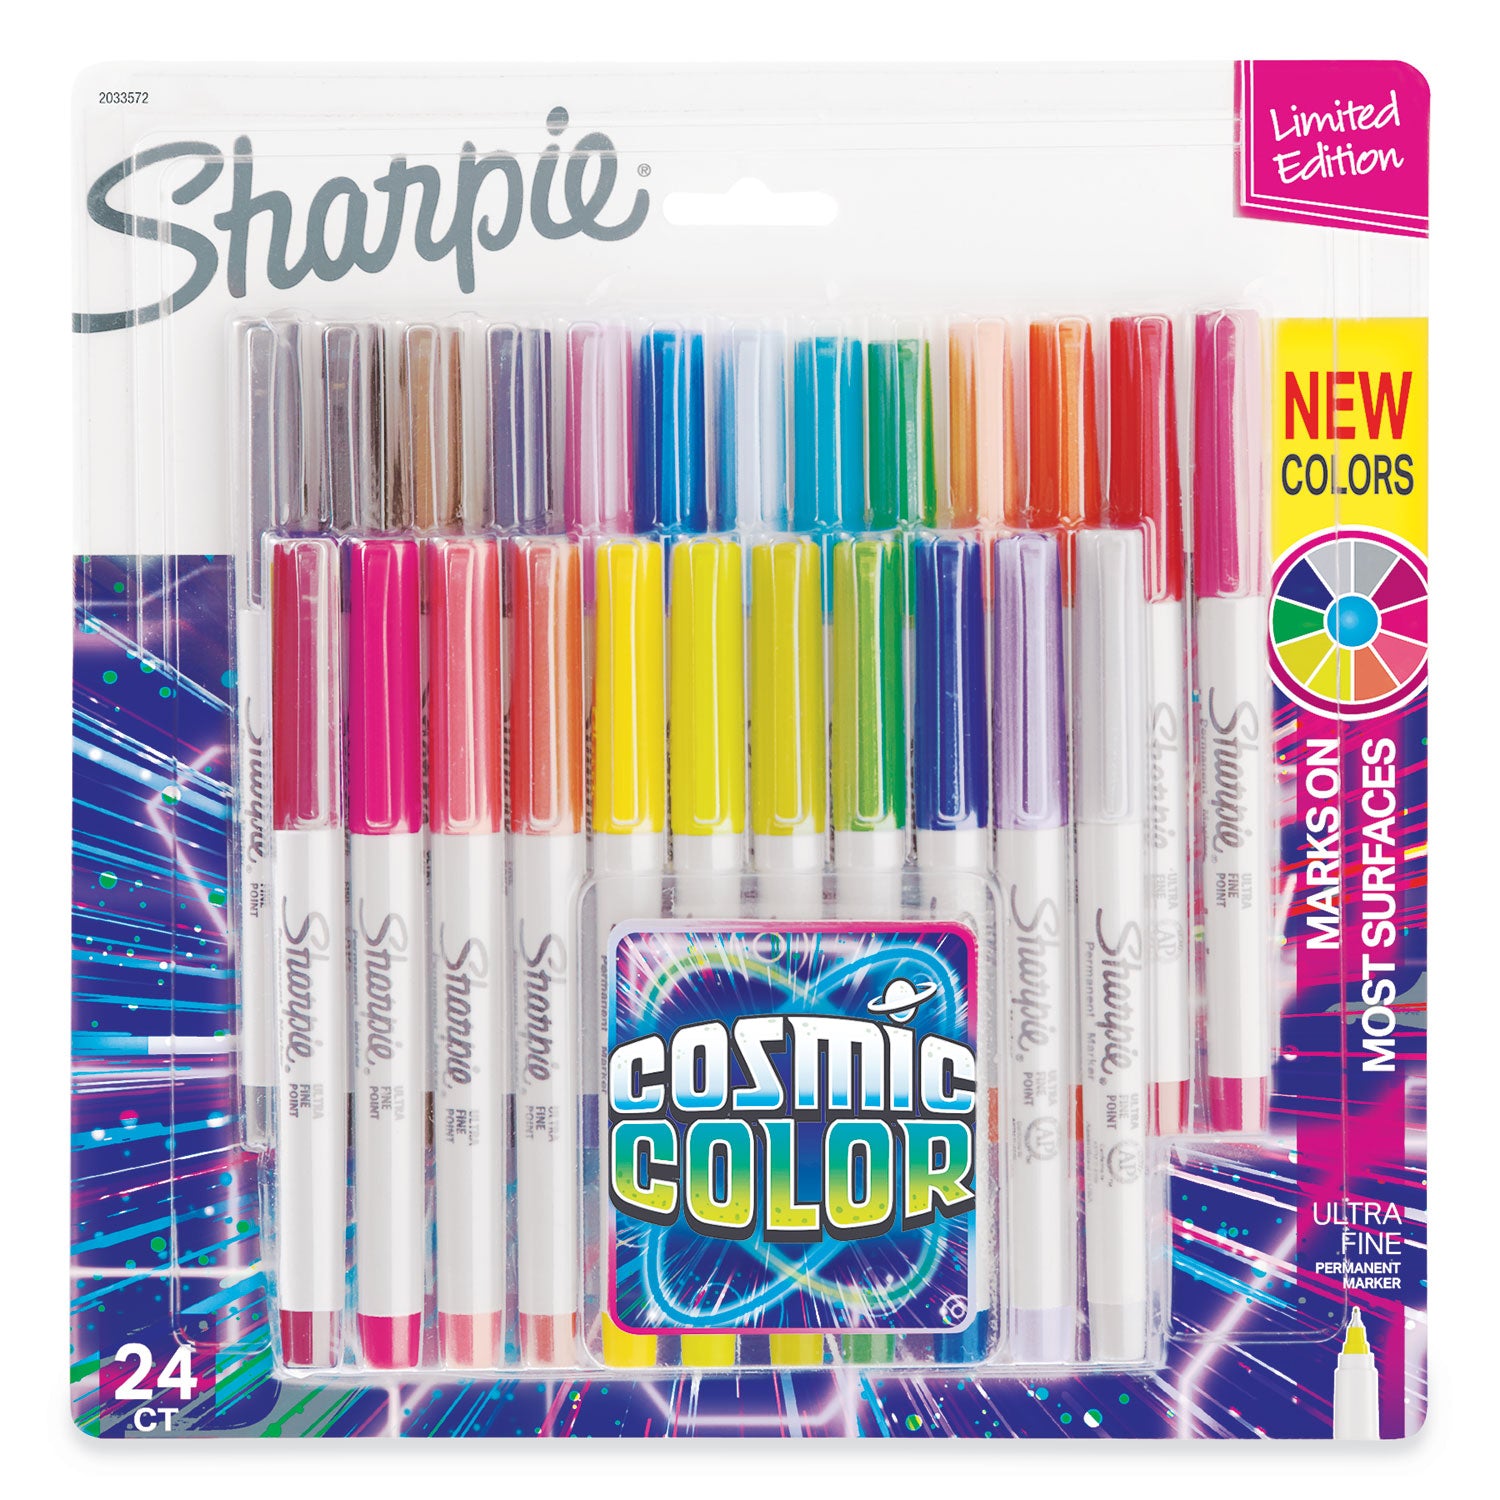 cosmic-color-permanent-markers-extra-fine-needle-tip-assorted-cosmic-colors-24-pack_san2033572 - 1